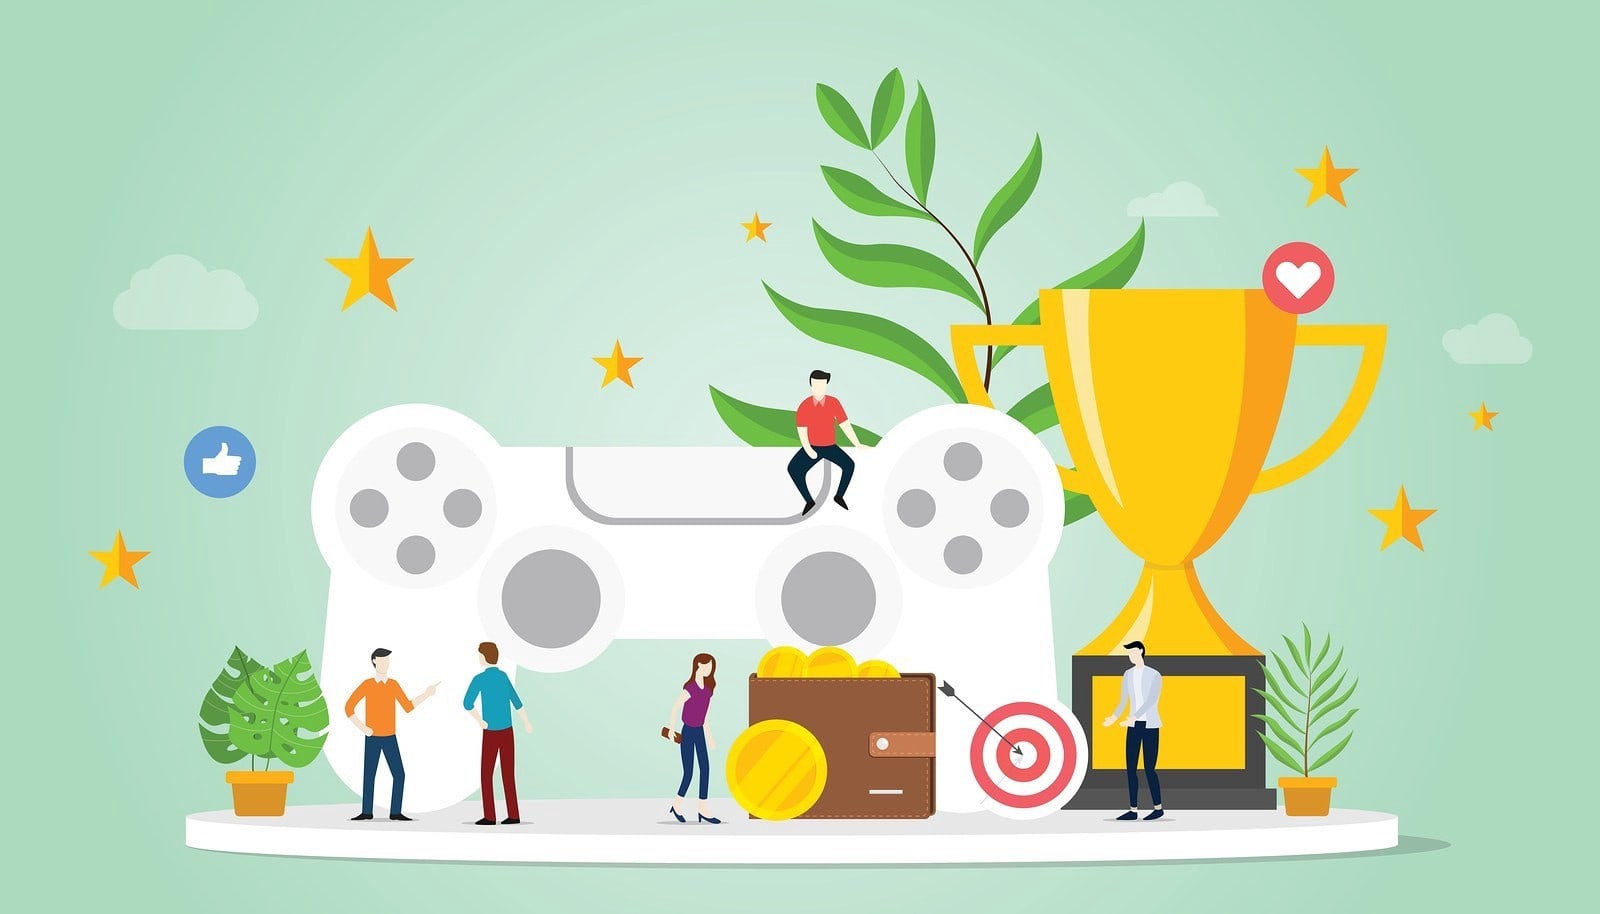 Gamification In Marketing: Advantages And Best Practices